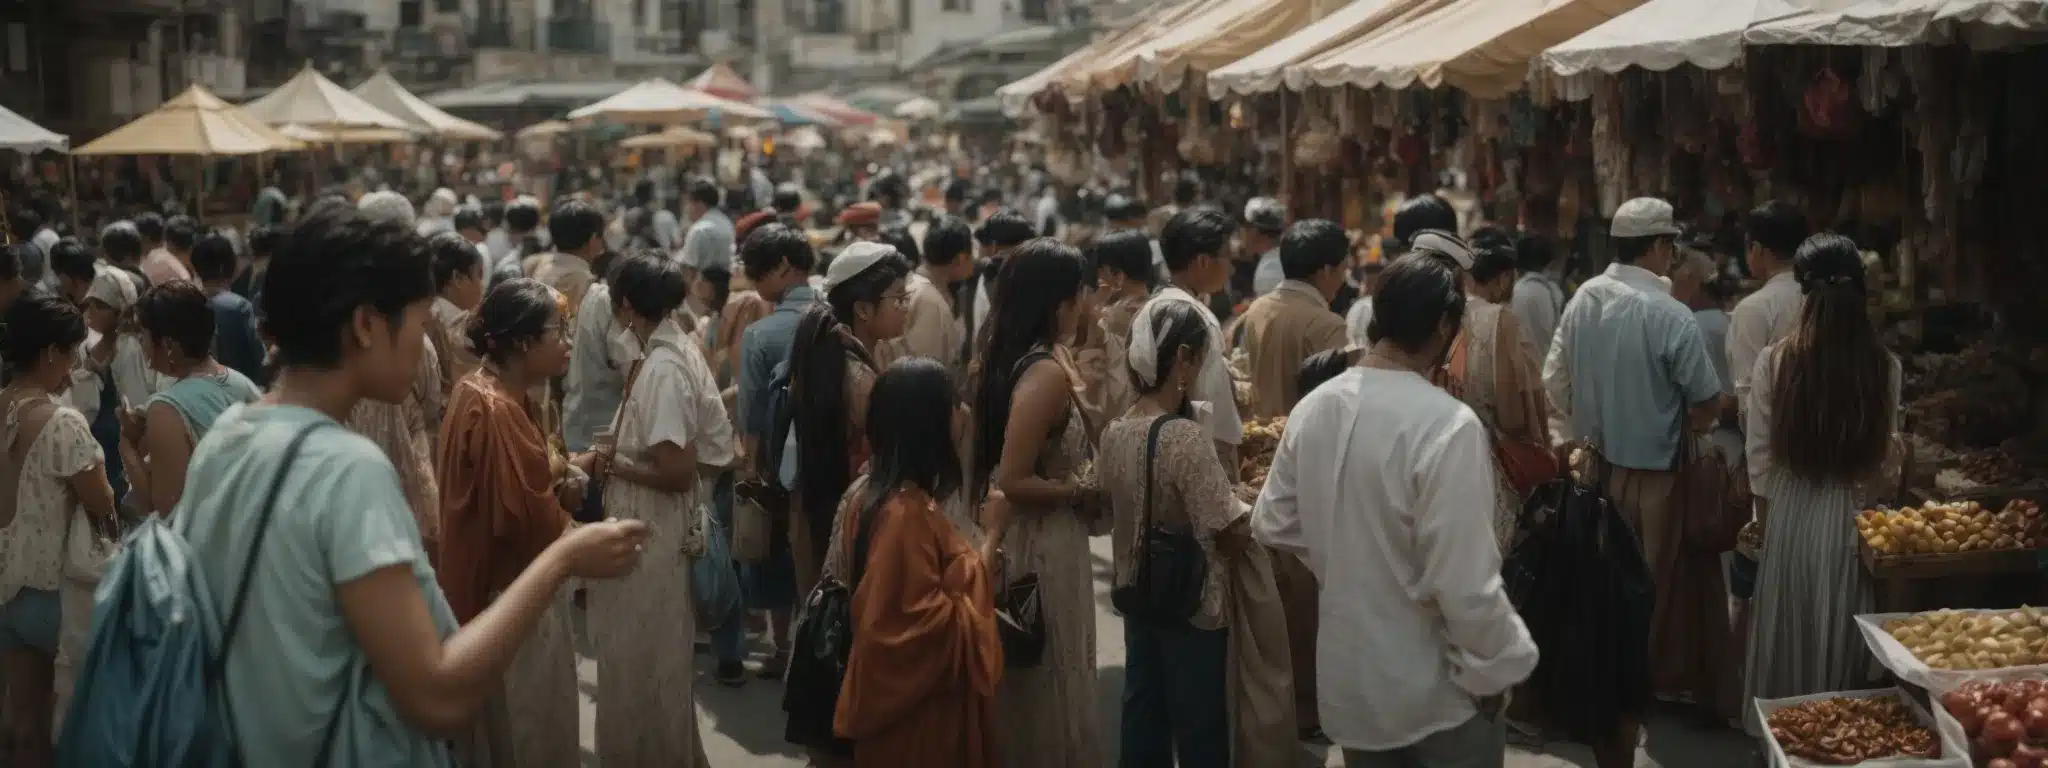 A Diverse Crowd Of People Mingling At An Outdoor Marketplace, Browsing Various Stalls.